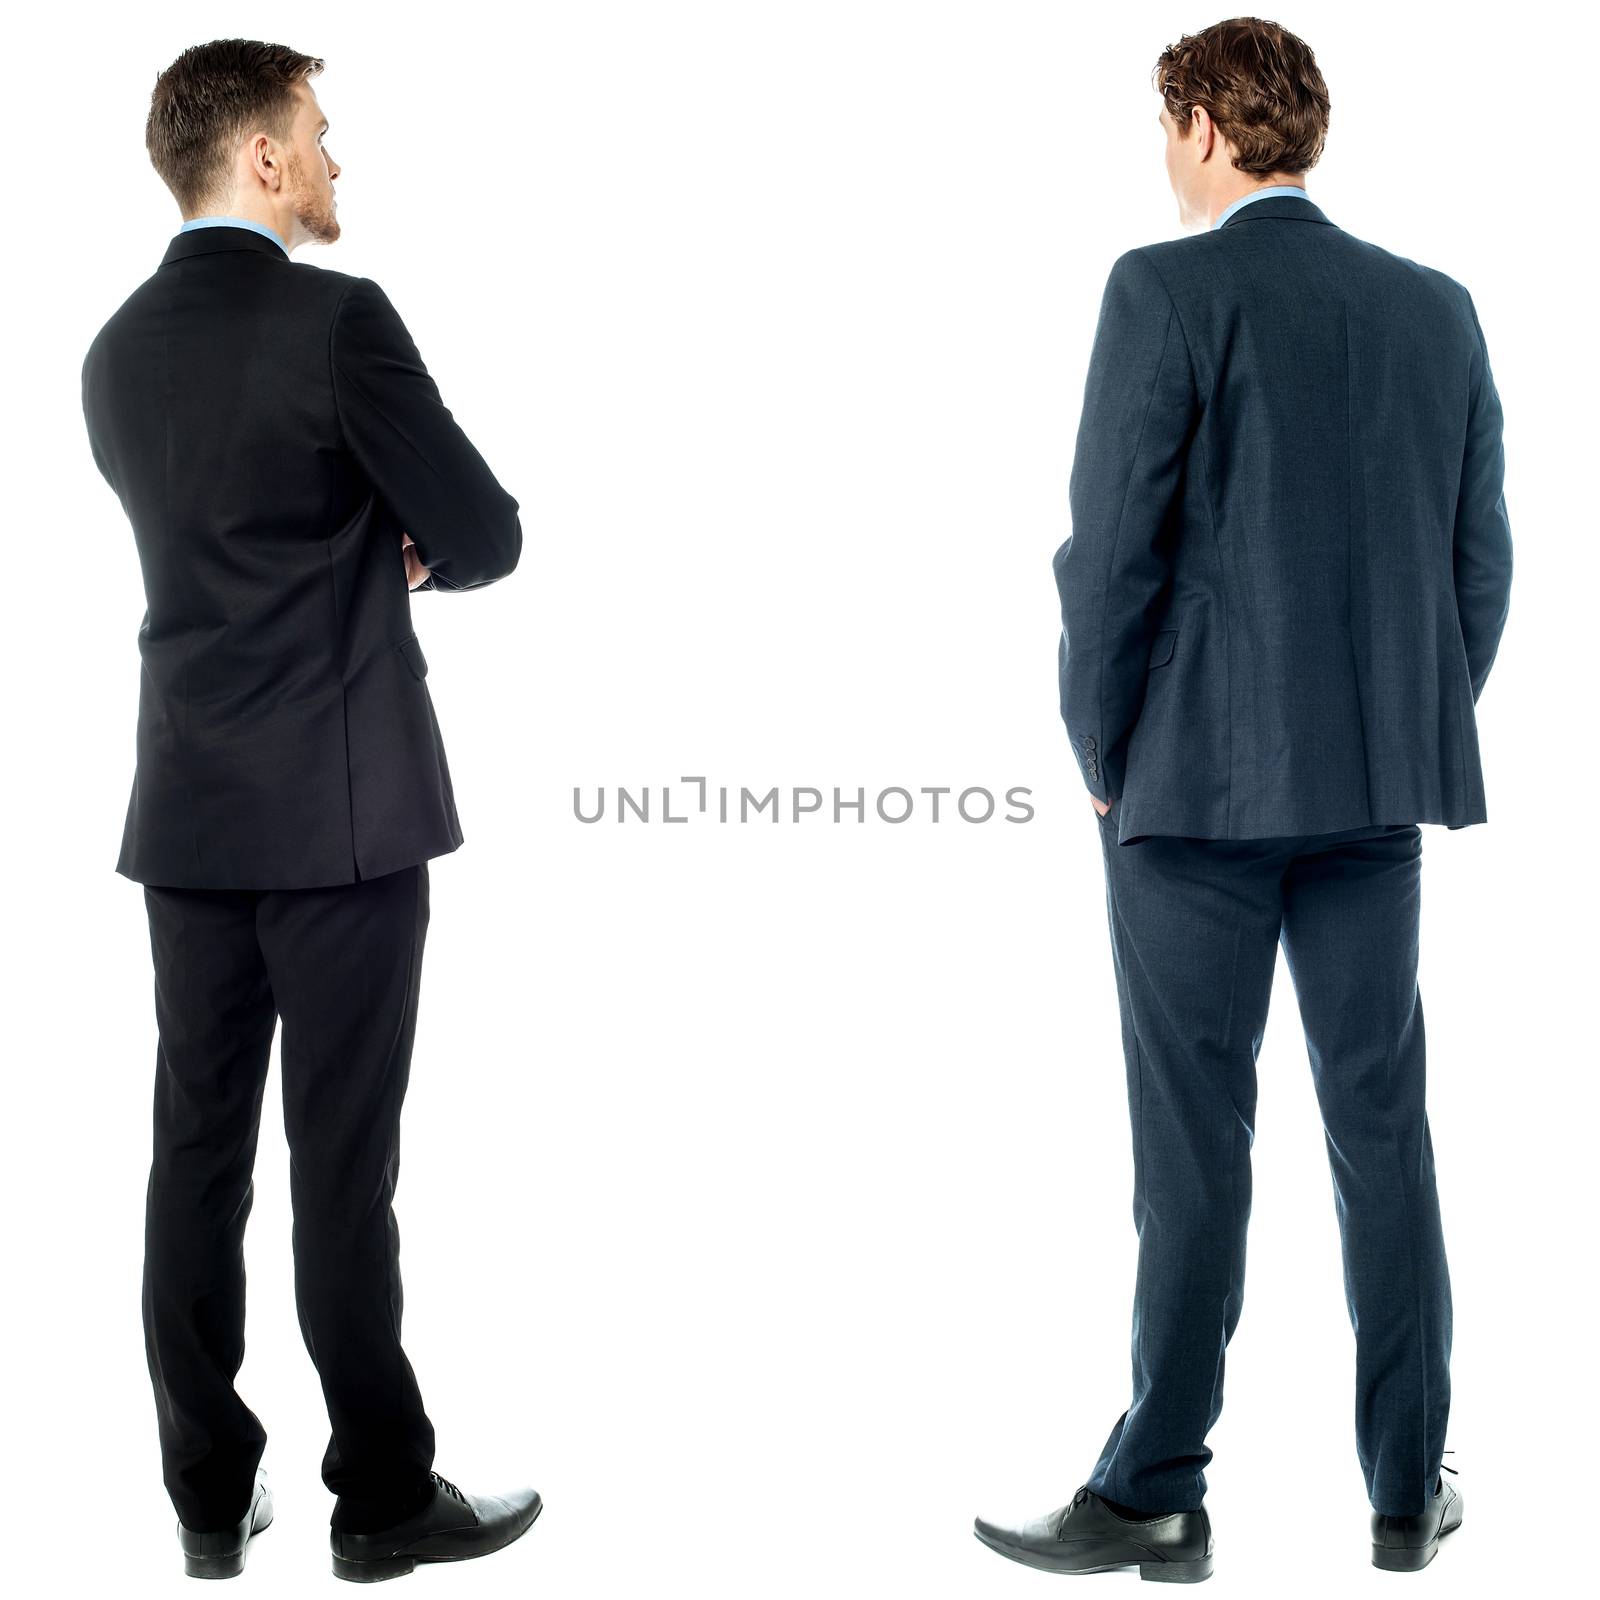 Two businessmen facing towards the wall